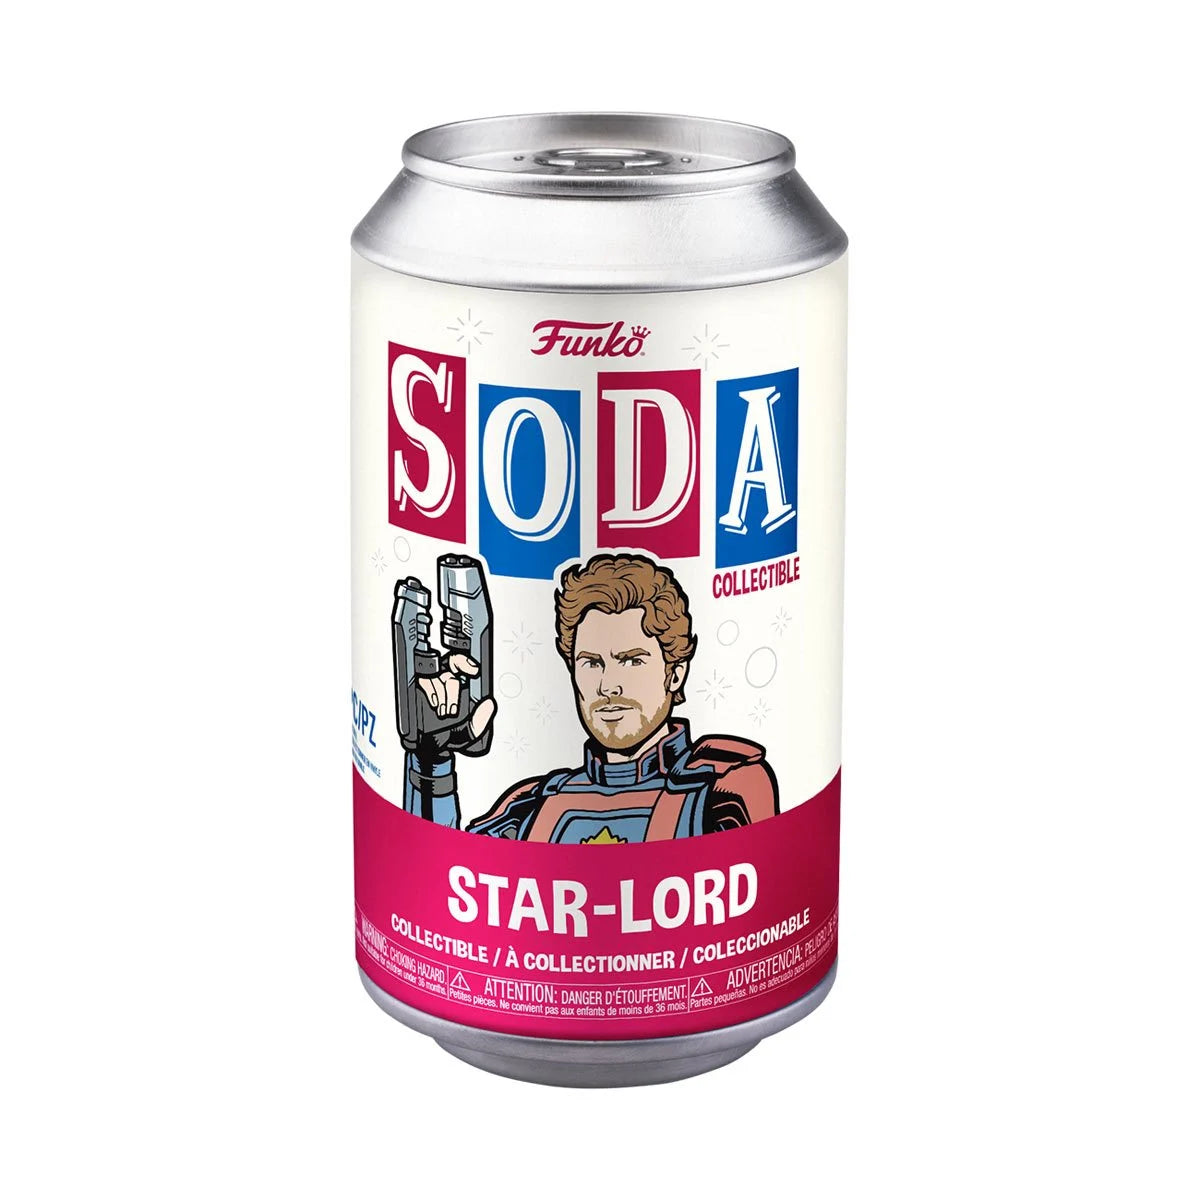 Star-Lord Guardians of the Galaxy Volume 3 Funko Vinyl Soda w/ Chance of chase!